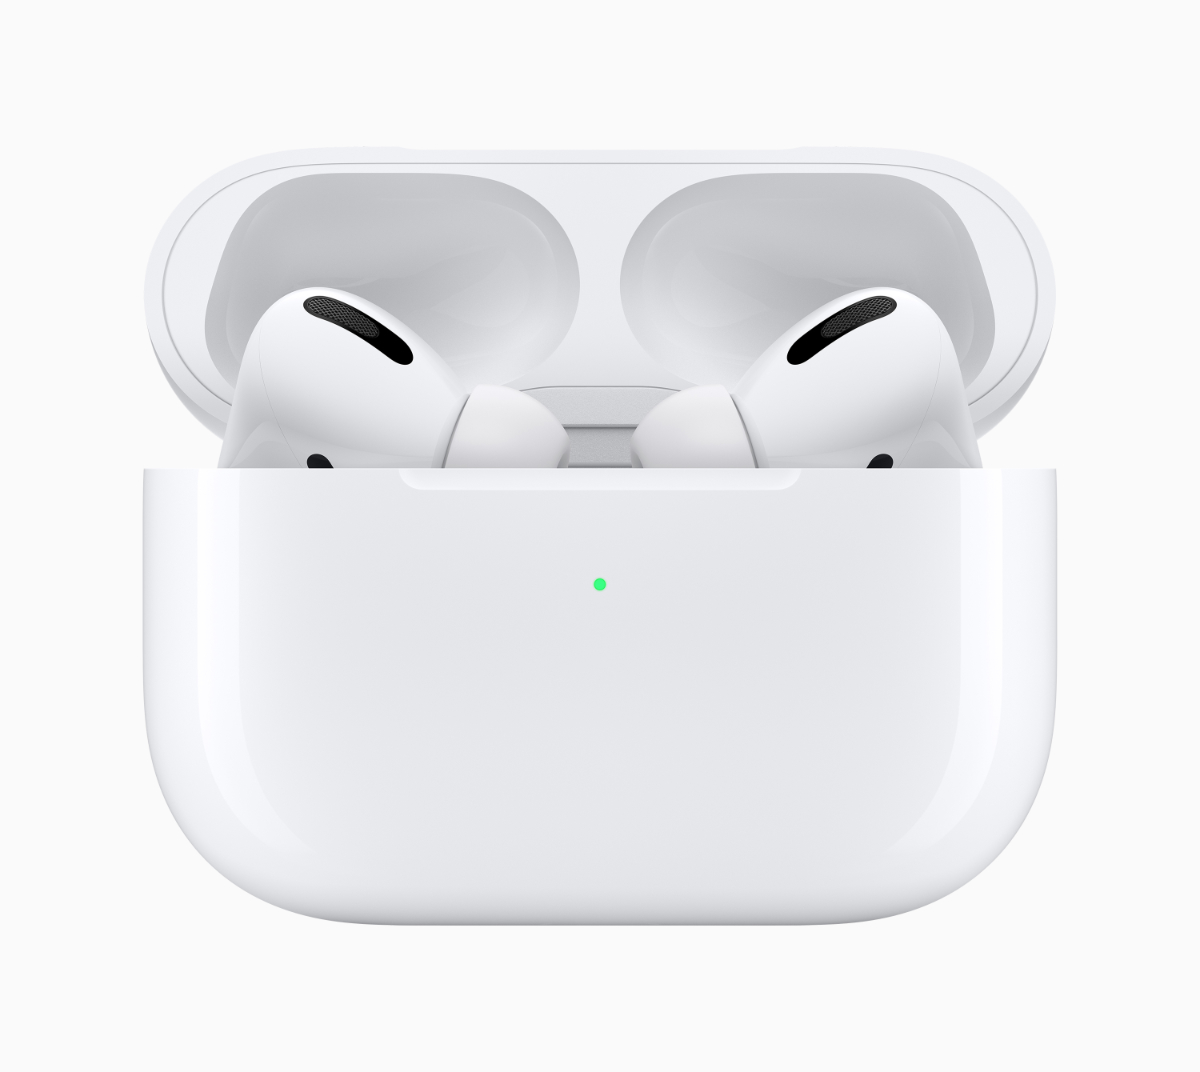 AirPods Pro have soft silicone ear-tips that seal out ambient noise.